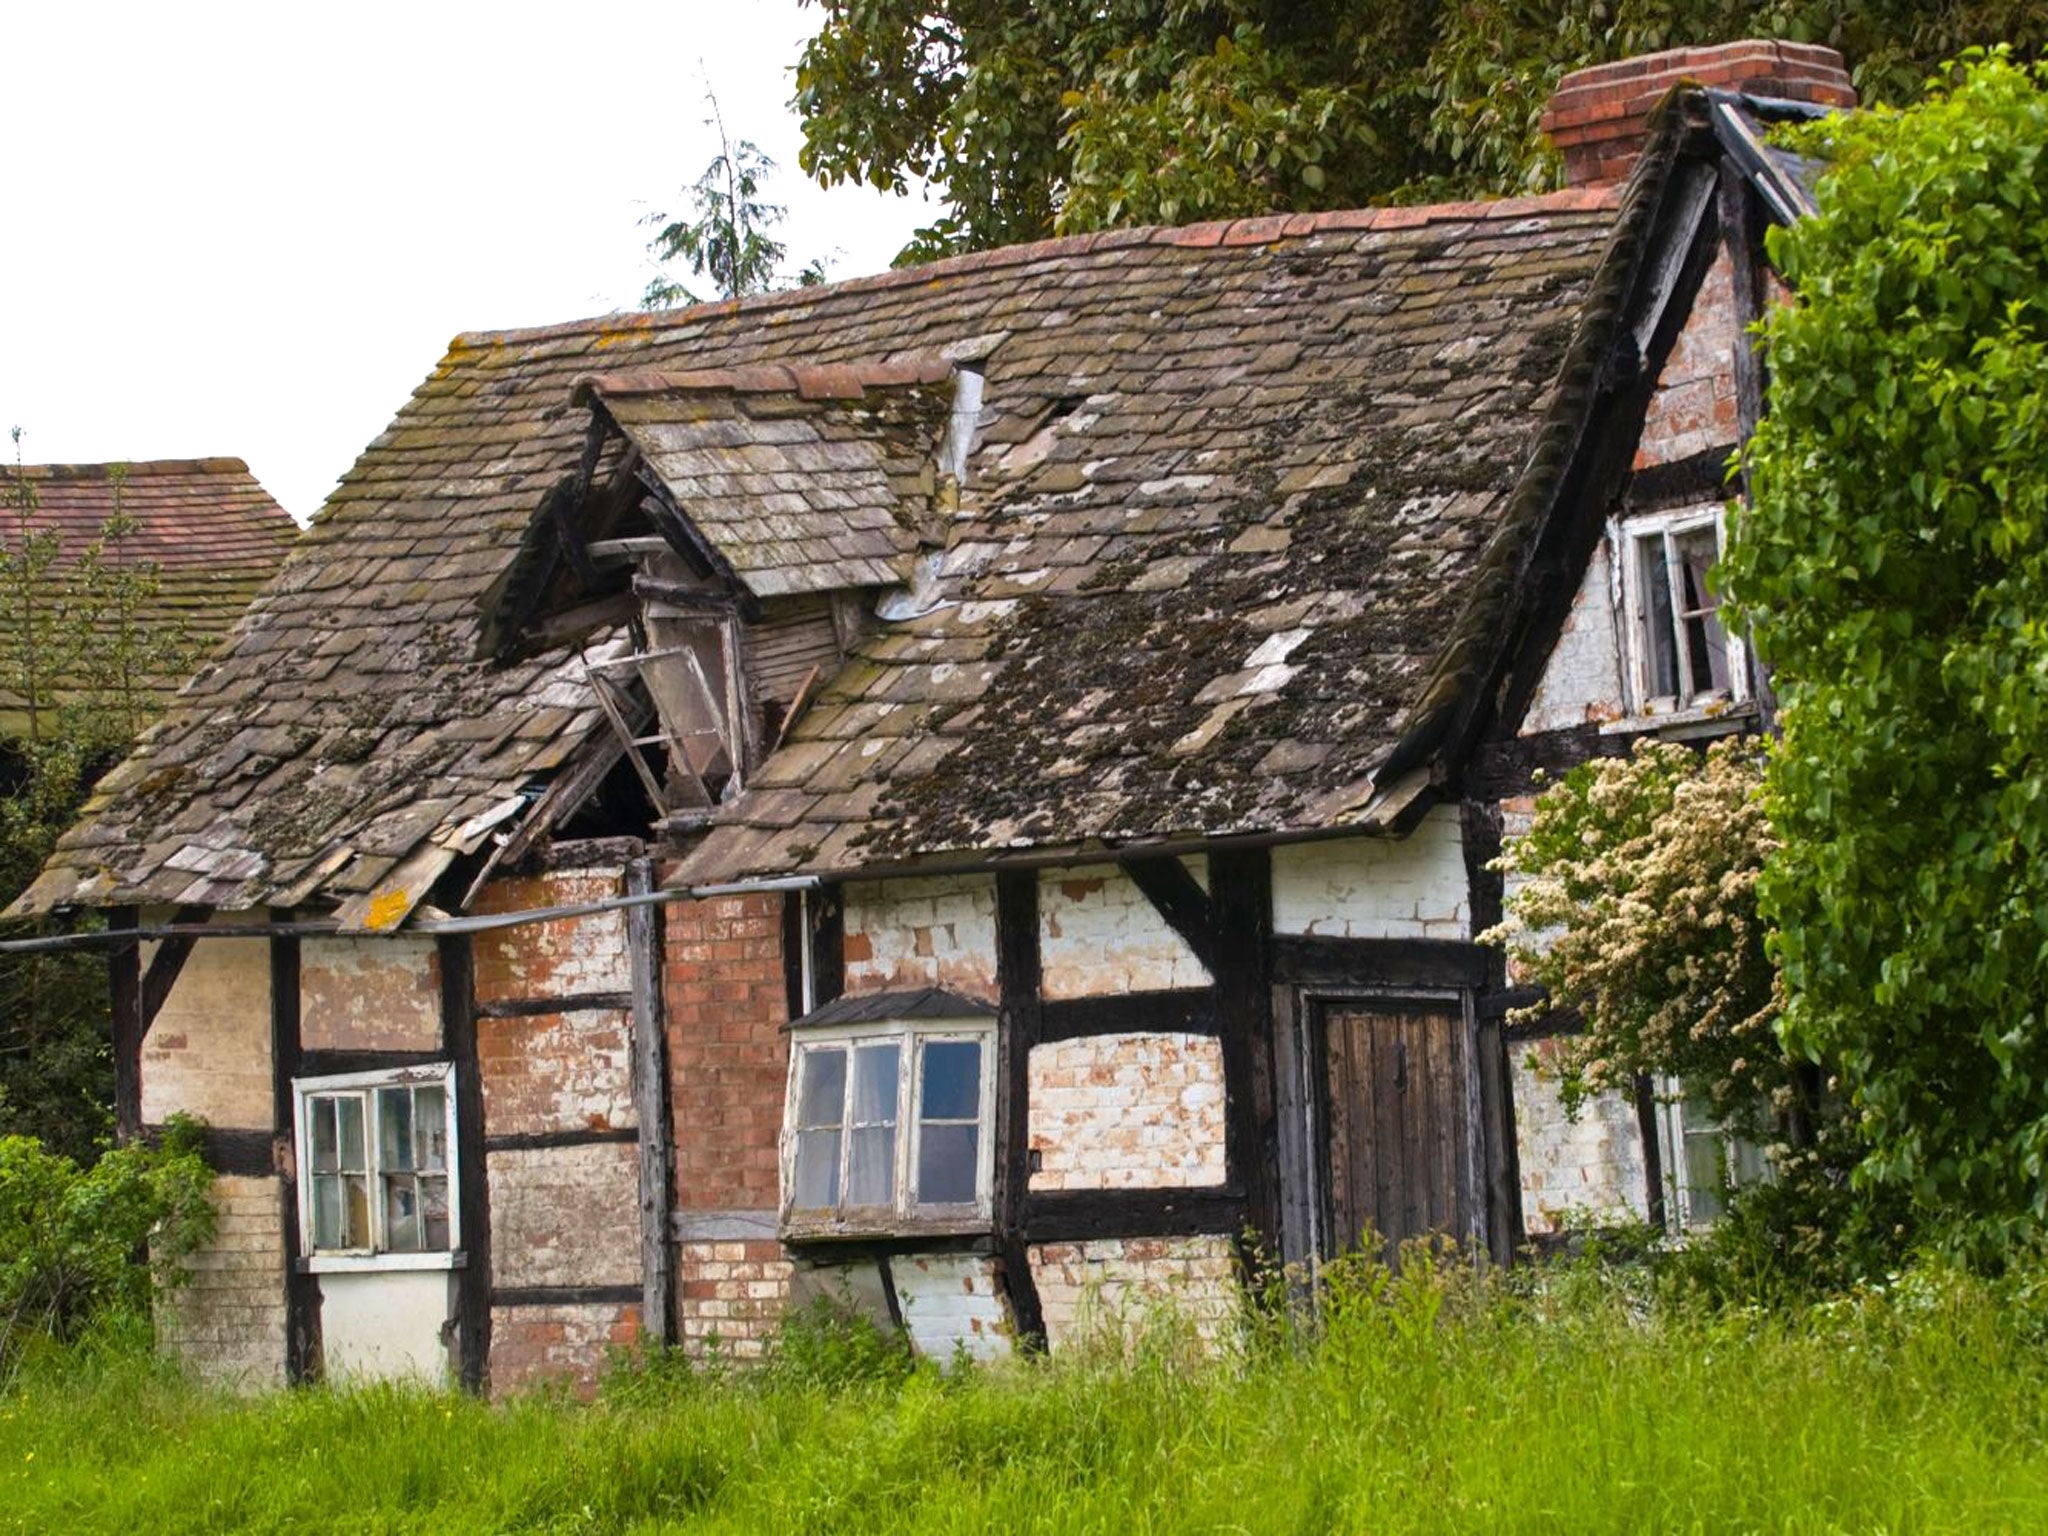 What a waste: spot a derelict property near London and you could earn £20